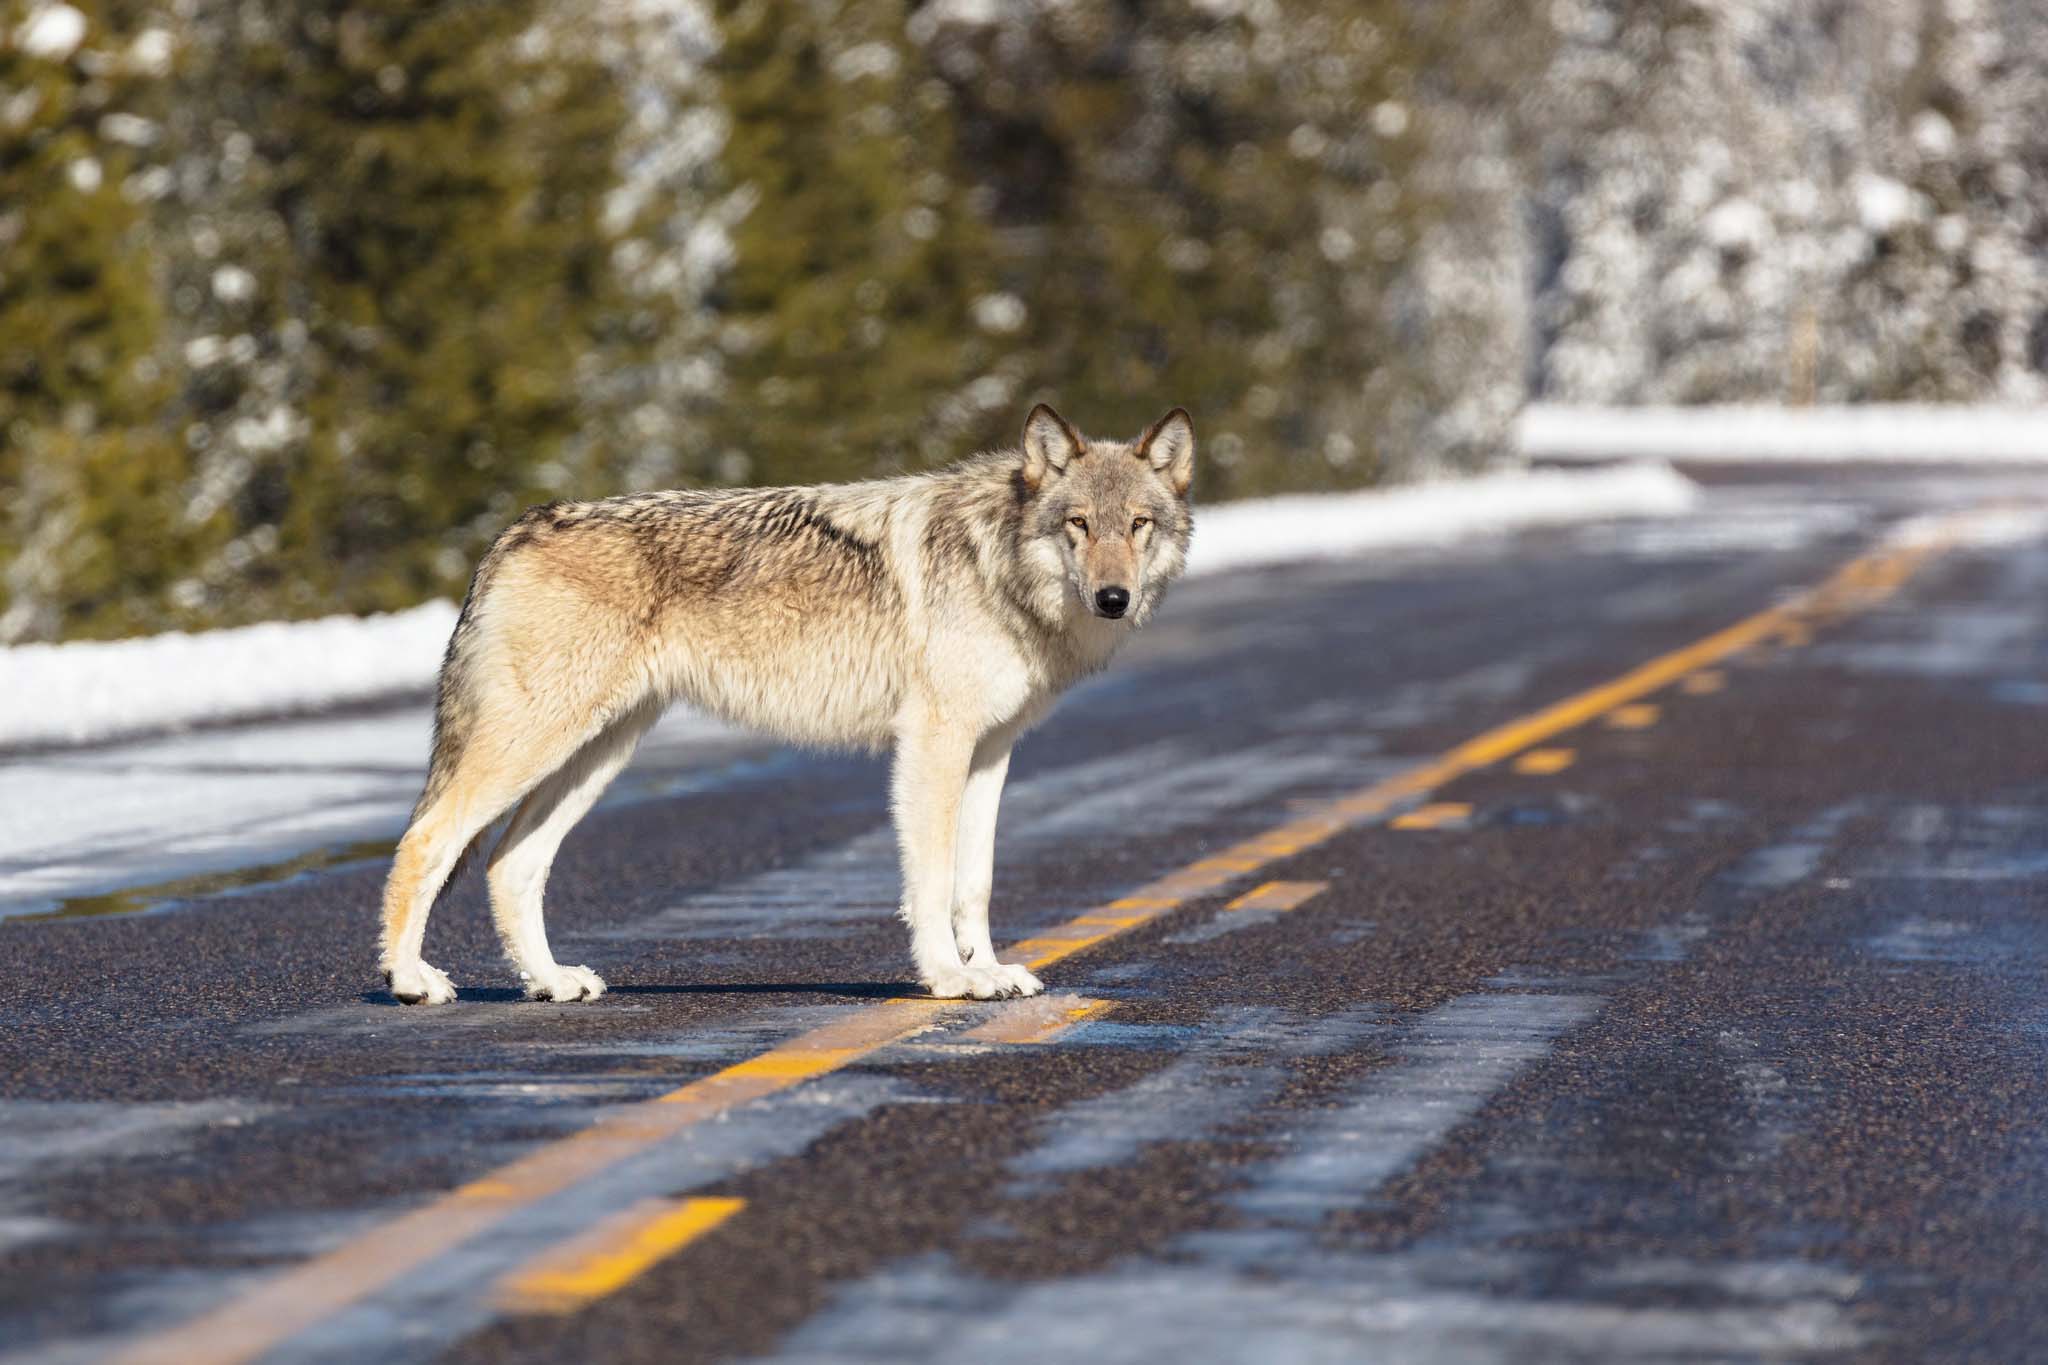 A wolf standing on an icy road, looking at the camera, with snowy trees in the background